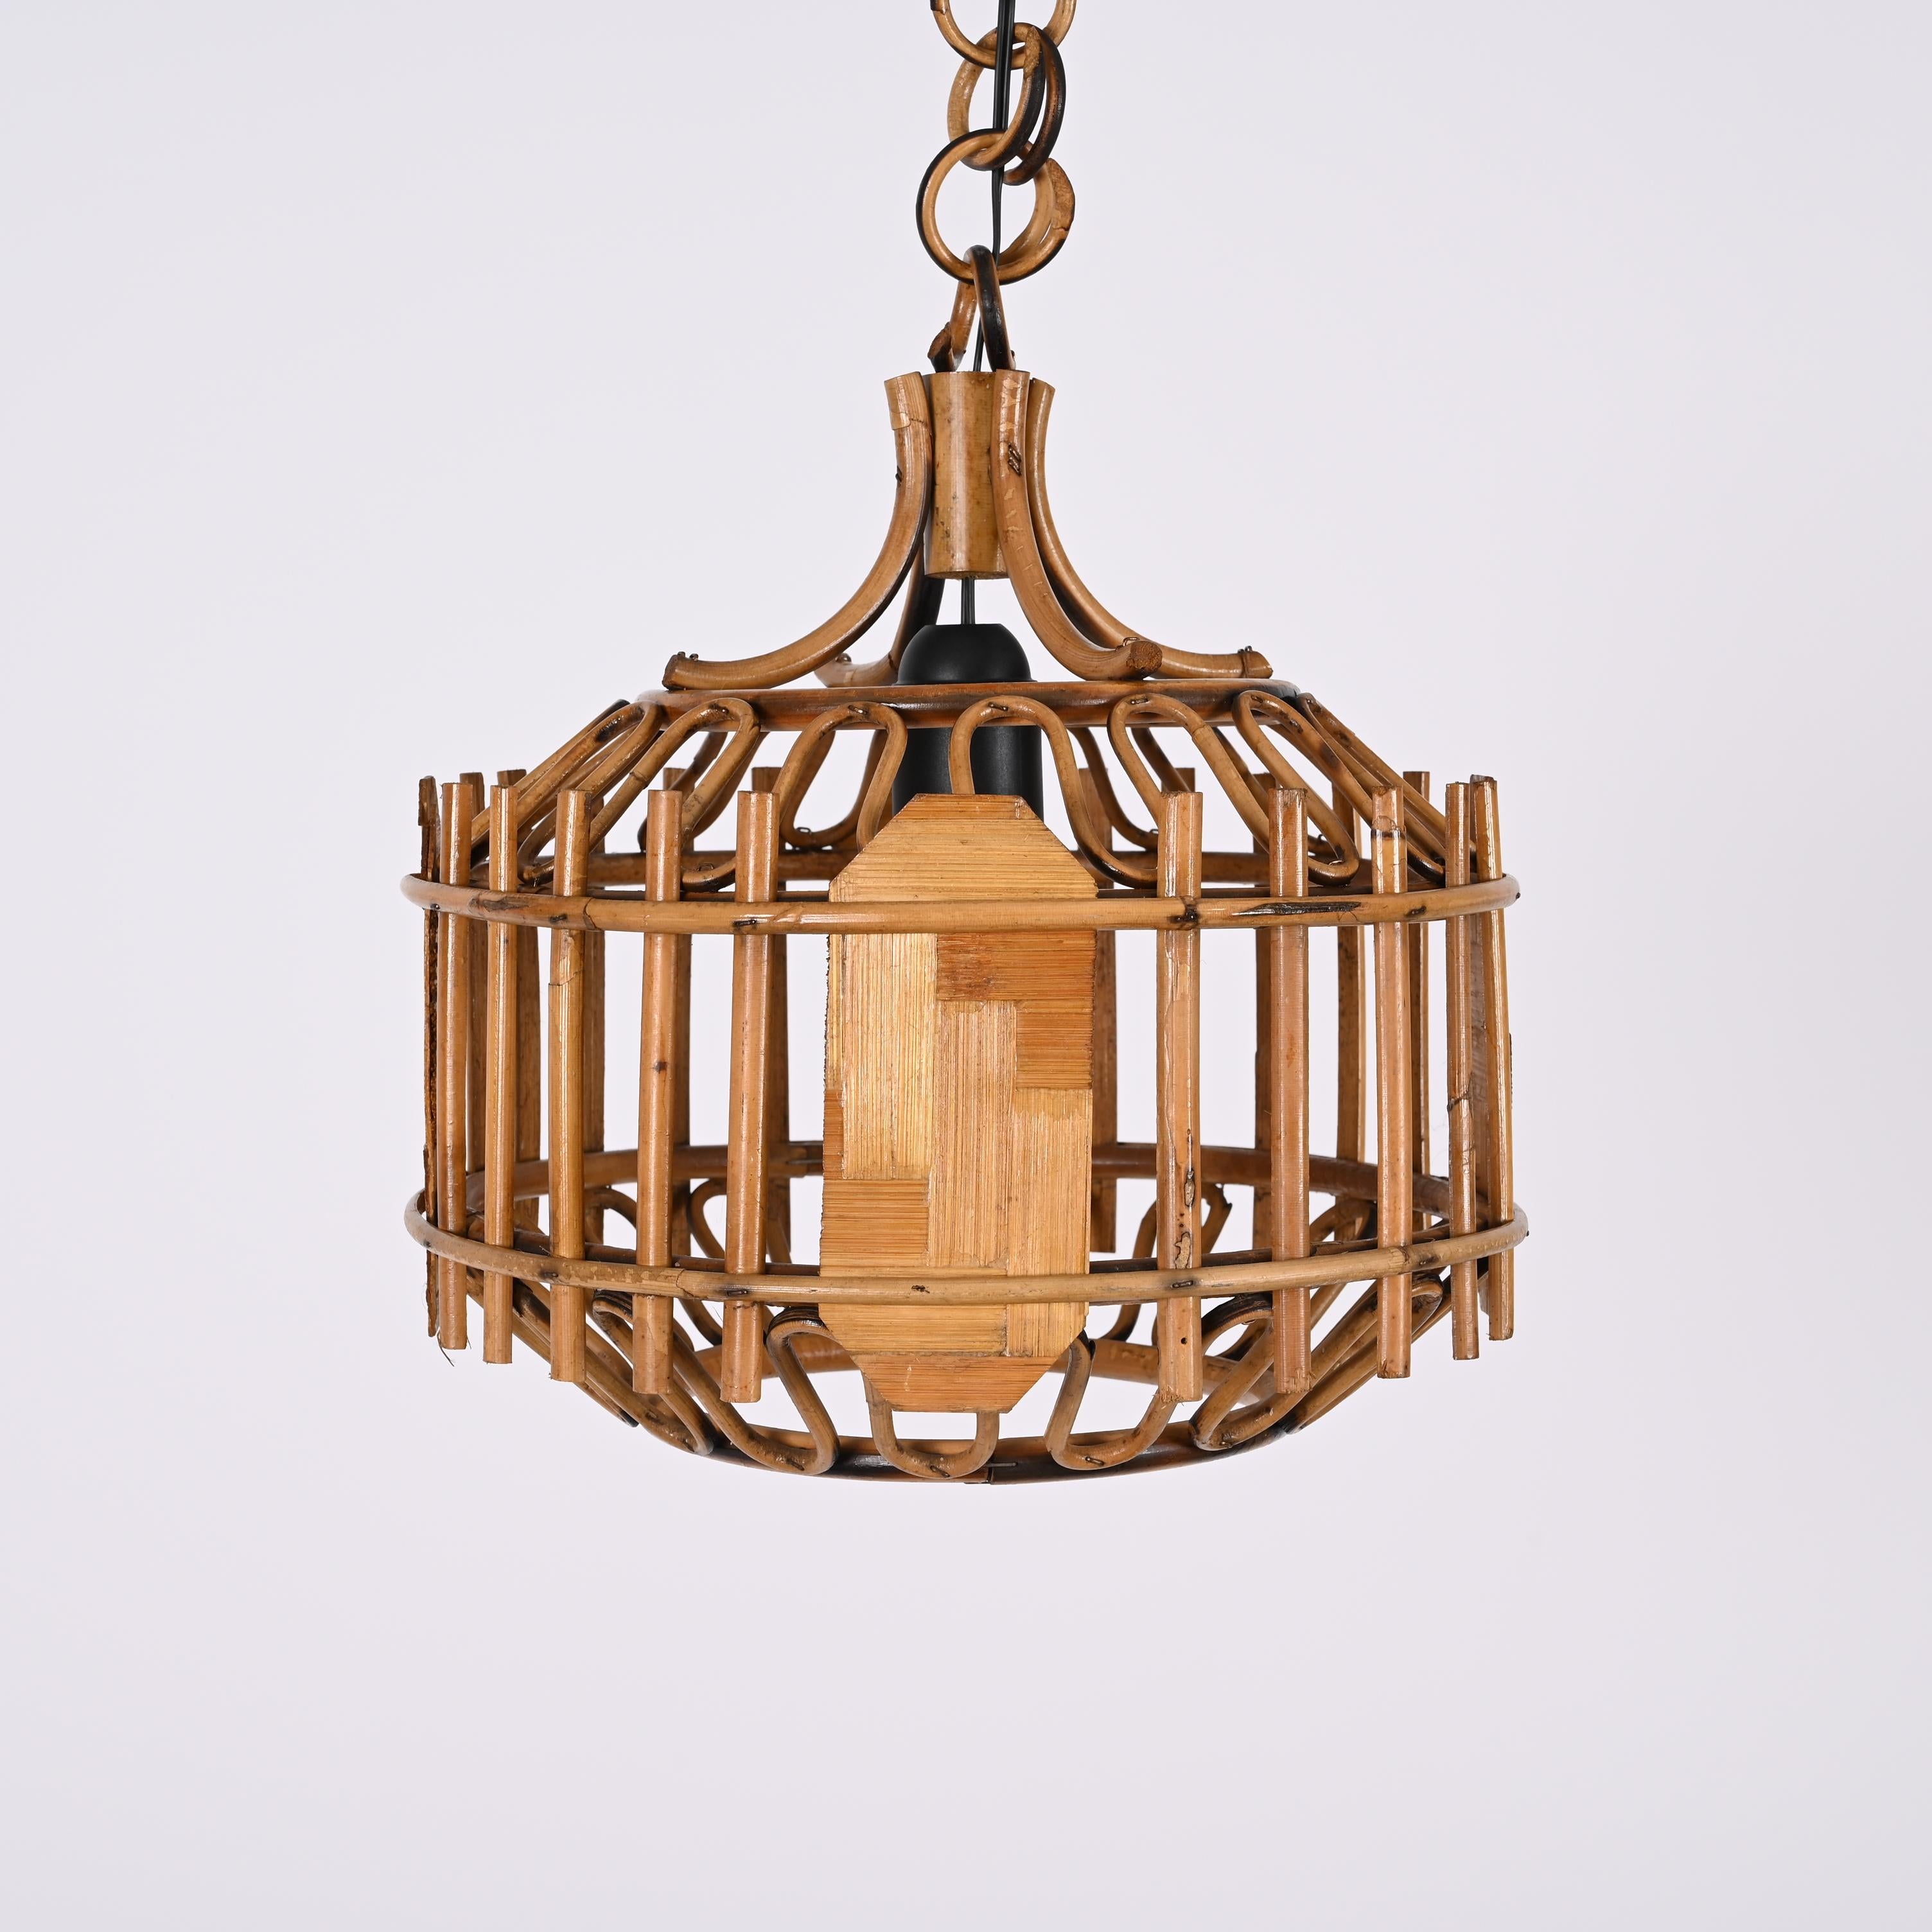 Midcentury French Riviera Bambo and Rattan Rounded Italian Chandelier, 1960s For Sale 8